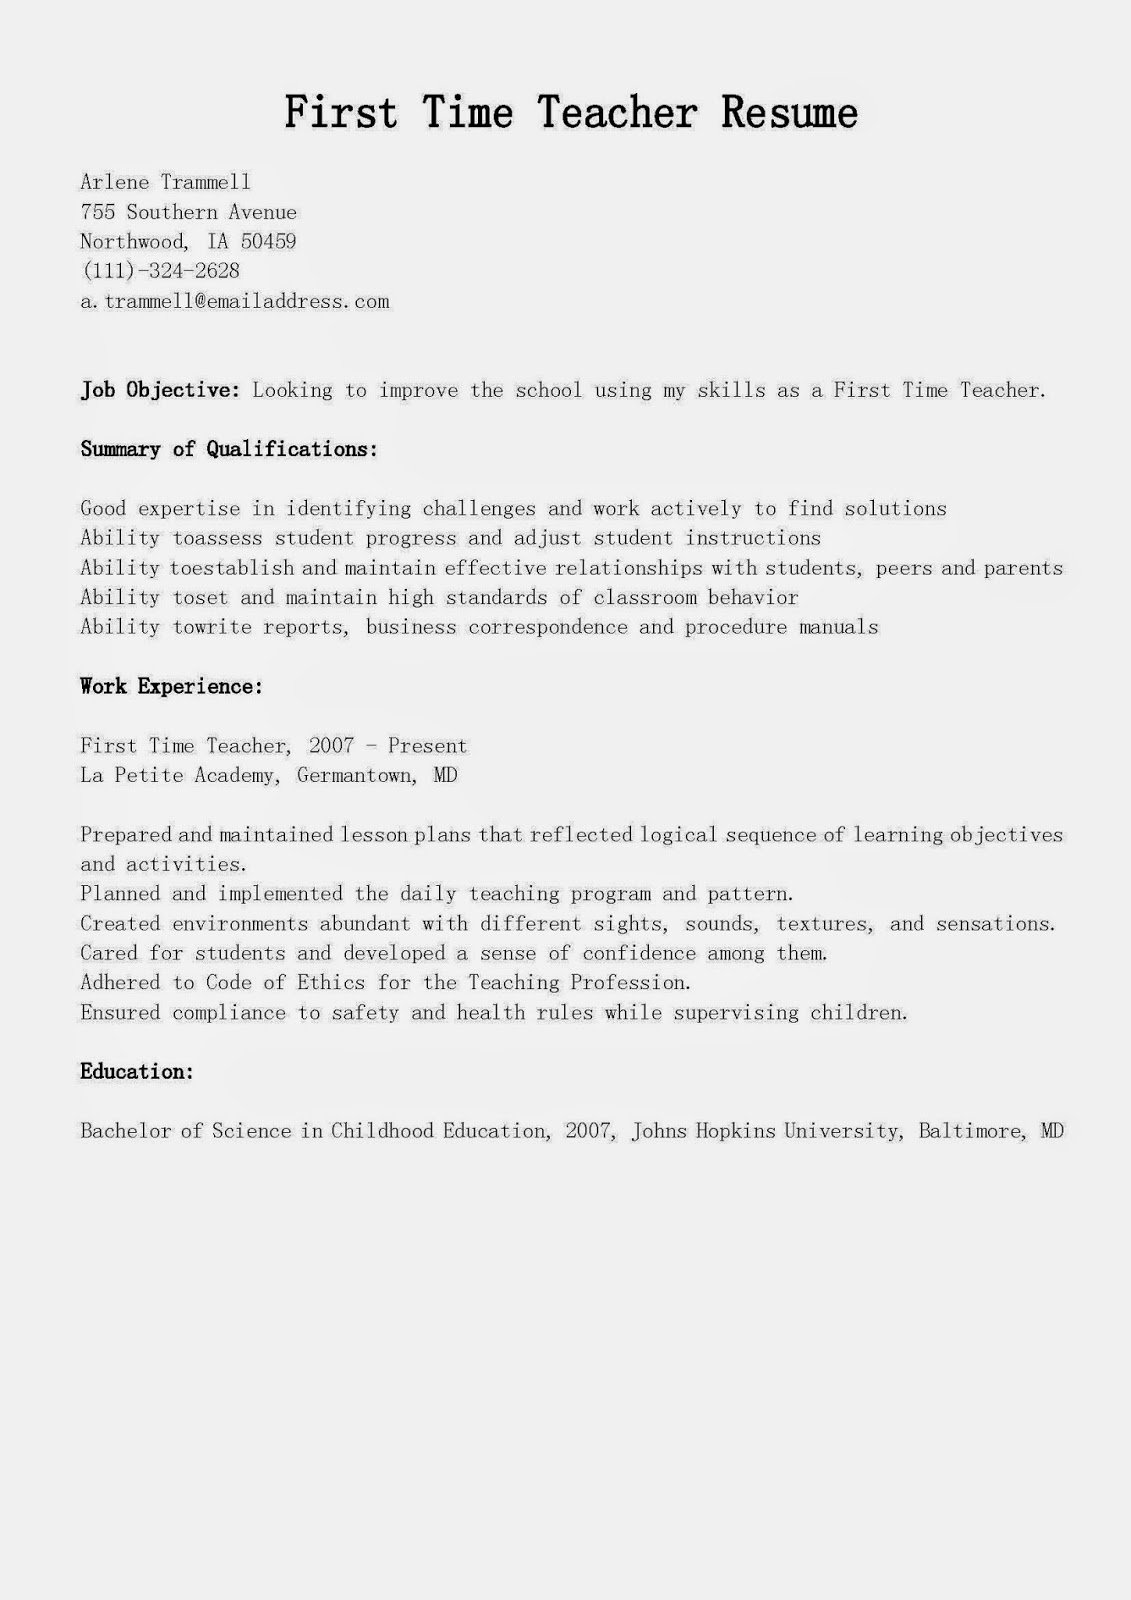 First Time Job Resume Awesome Resume Samples First Time Teacher Resume Sample